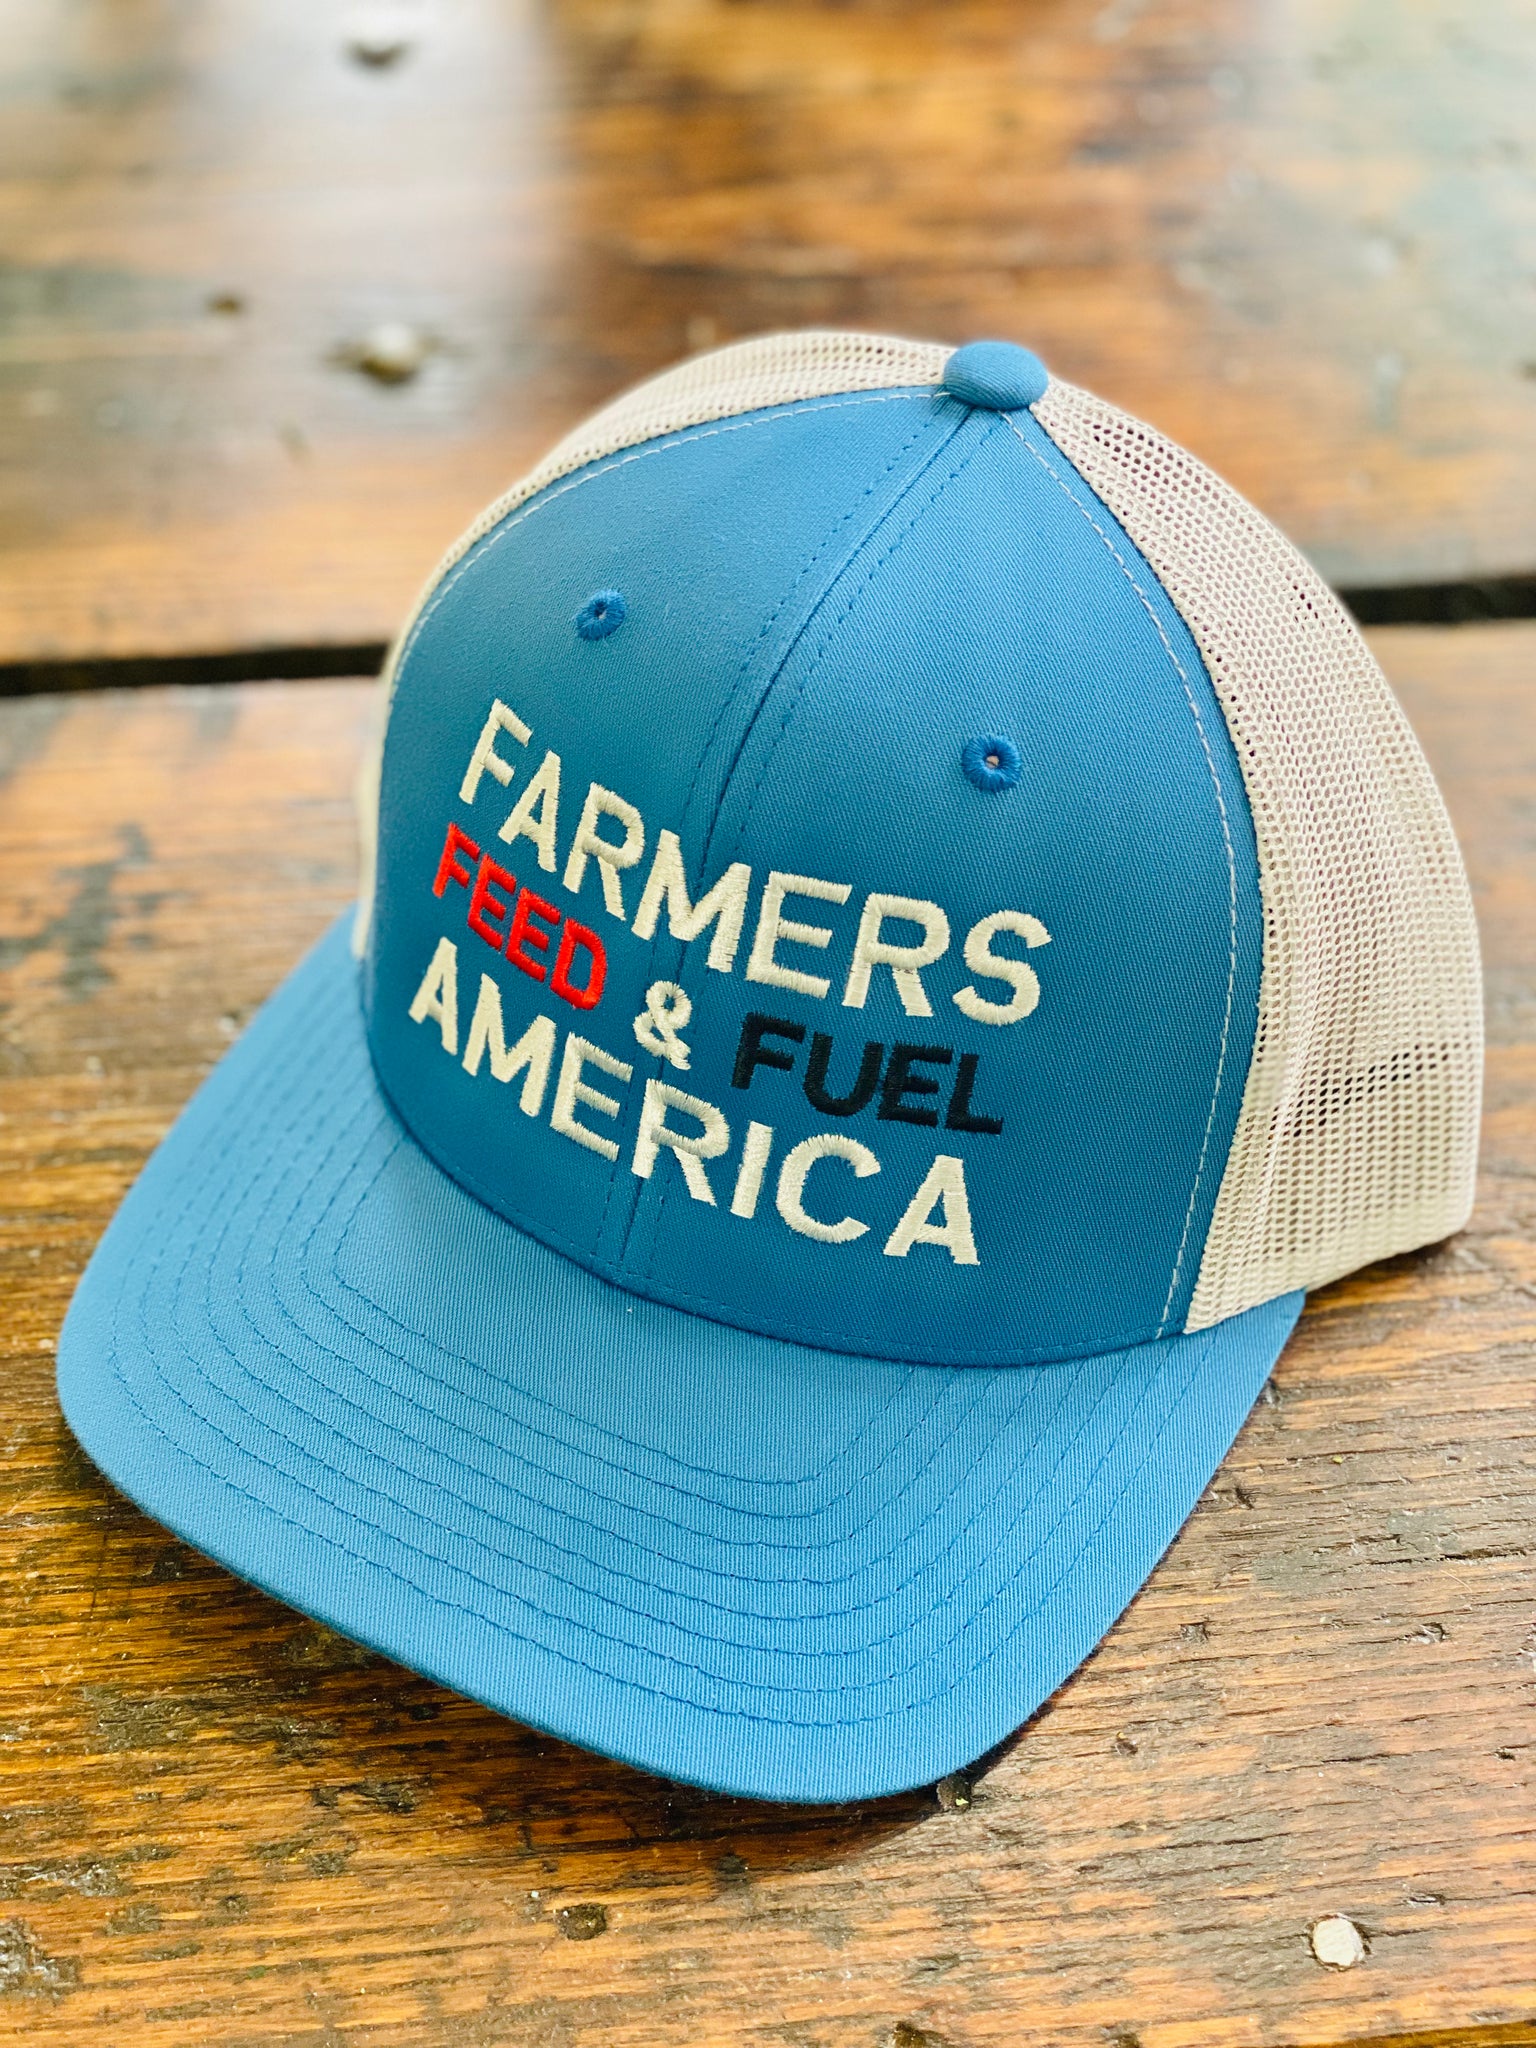 Farmers Feed and Fuel America Trucker Hat